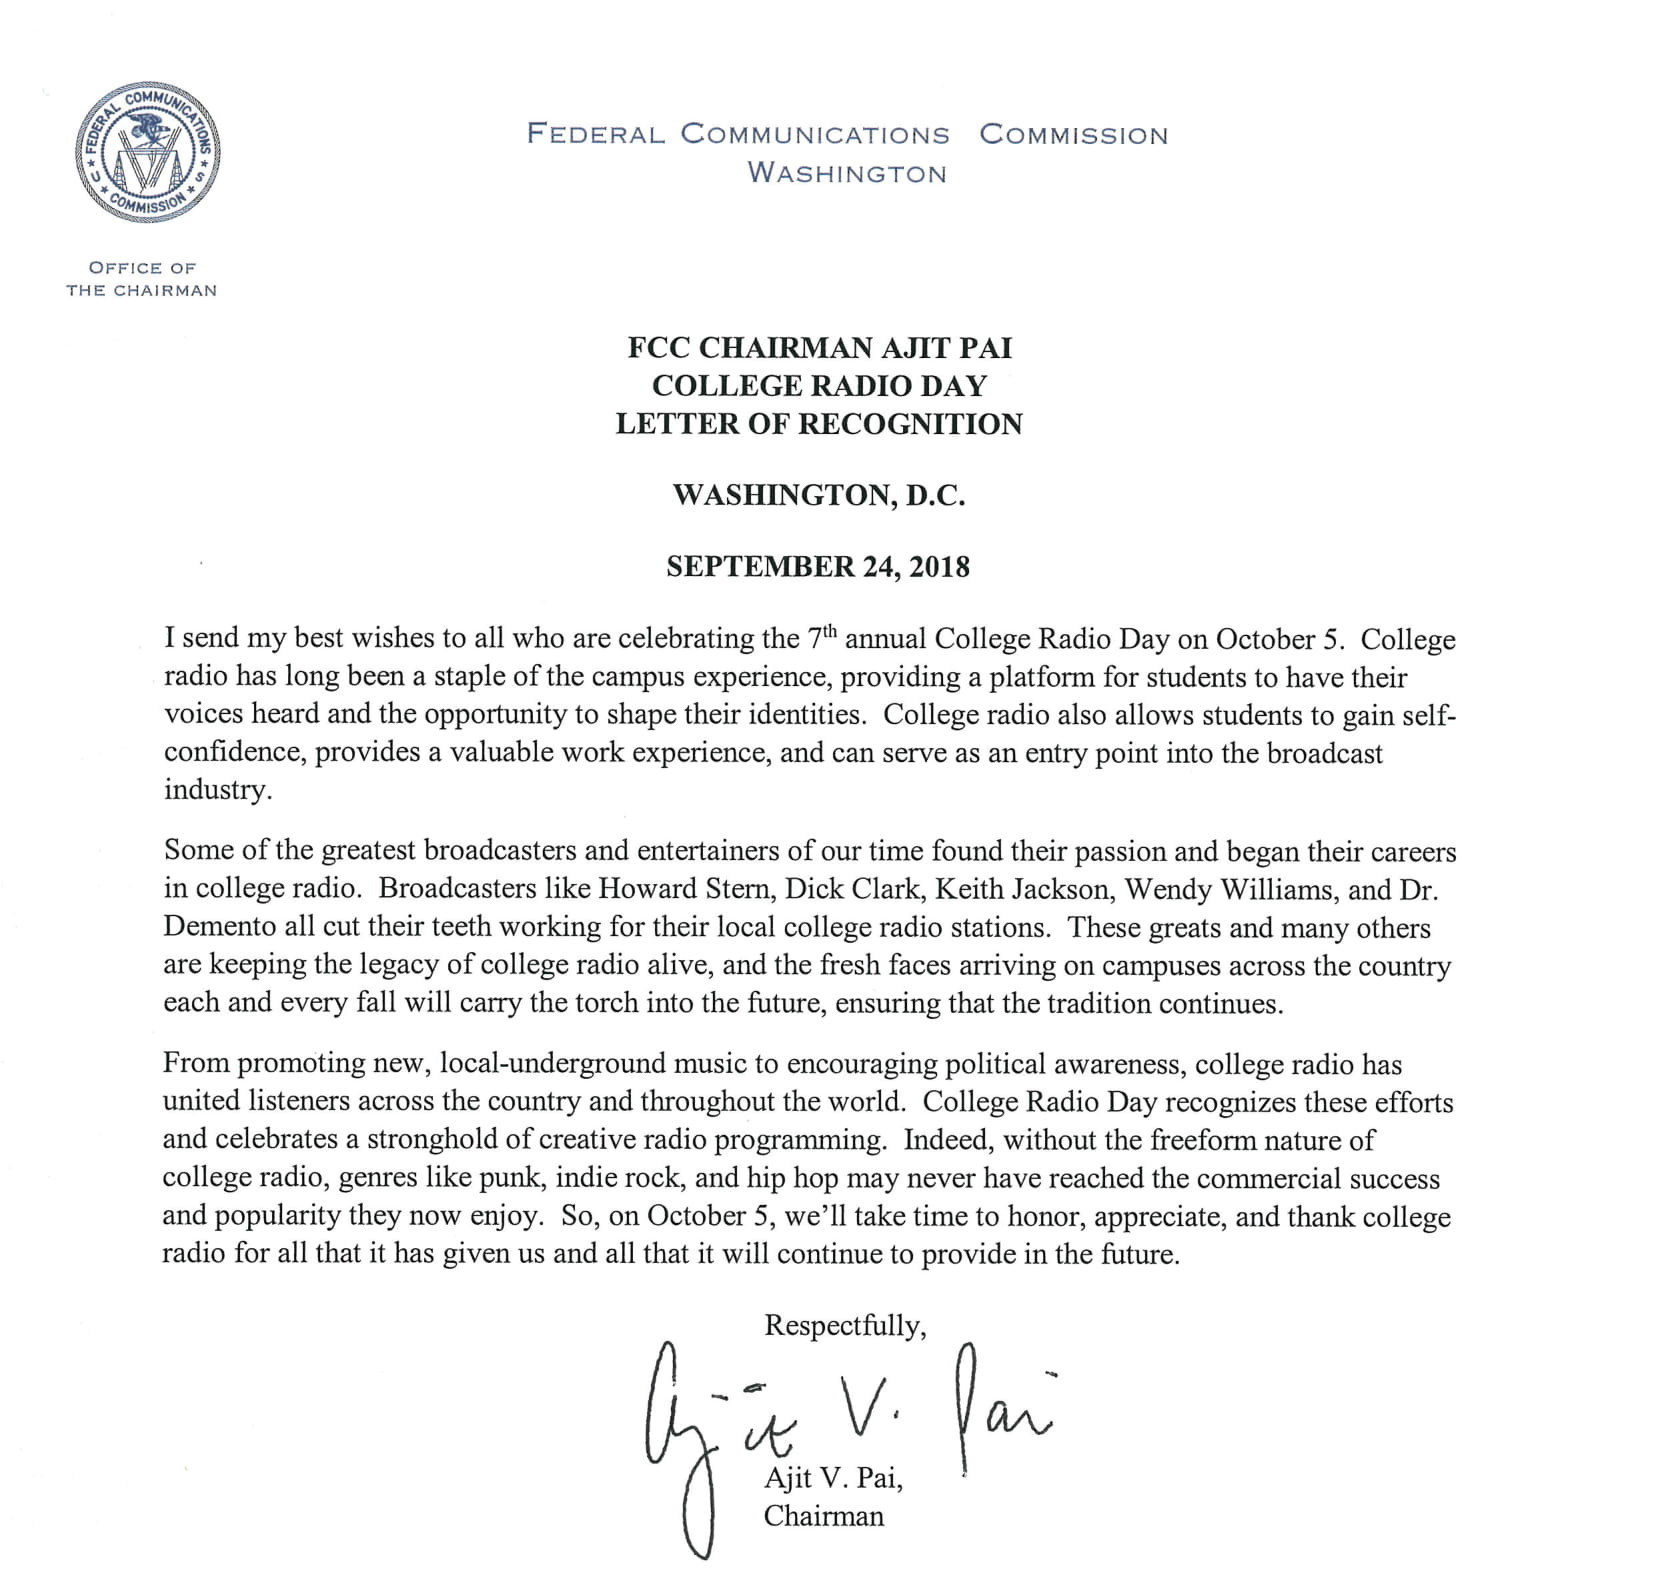 Tomorrow is CRD 2018! Letter From FCC’s Chairman Ajit Pai